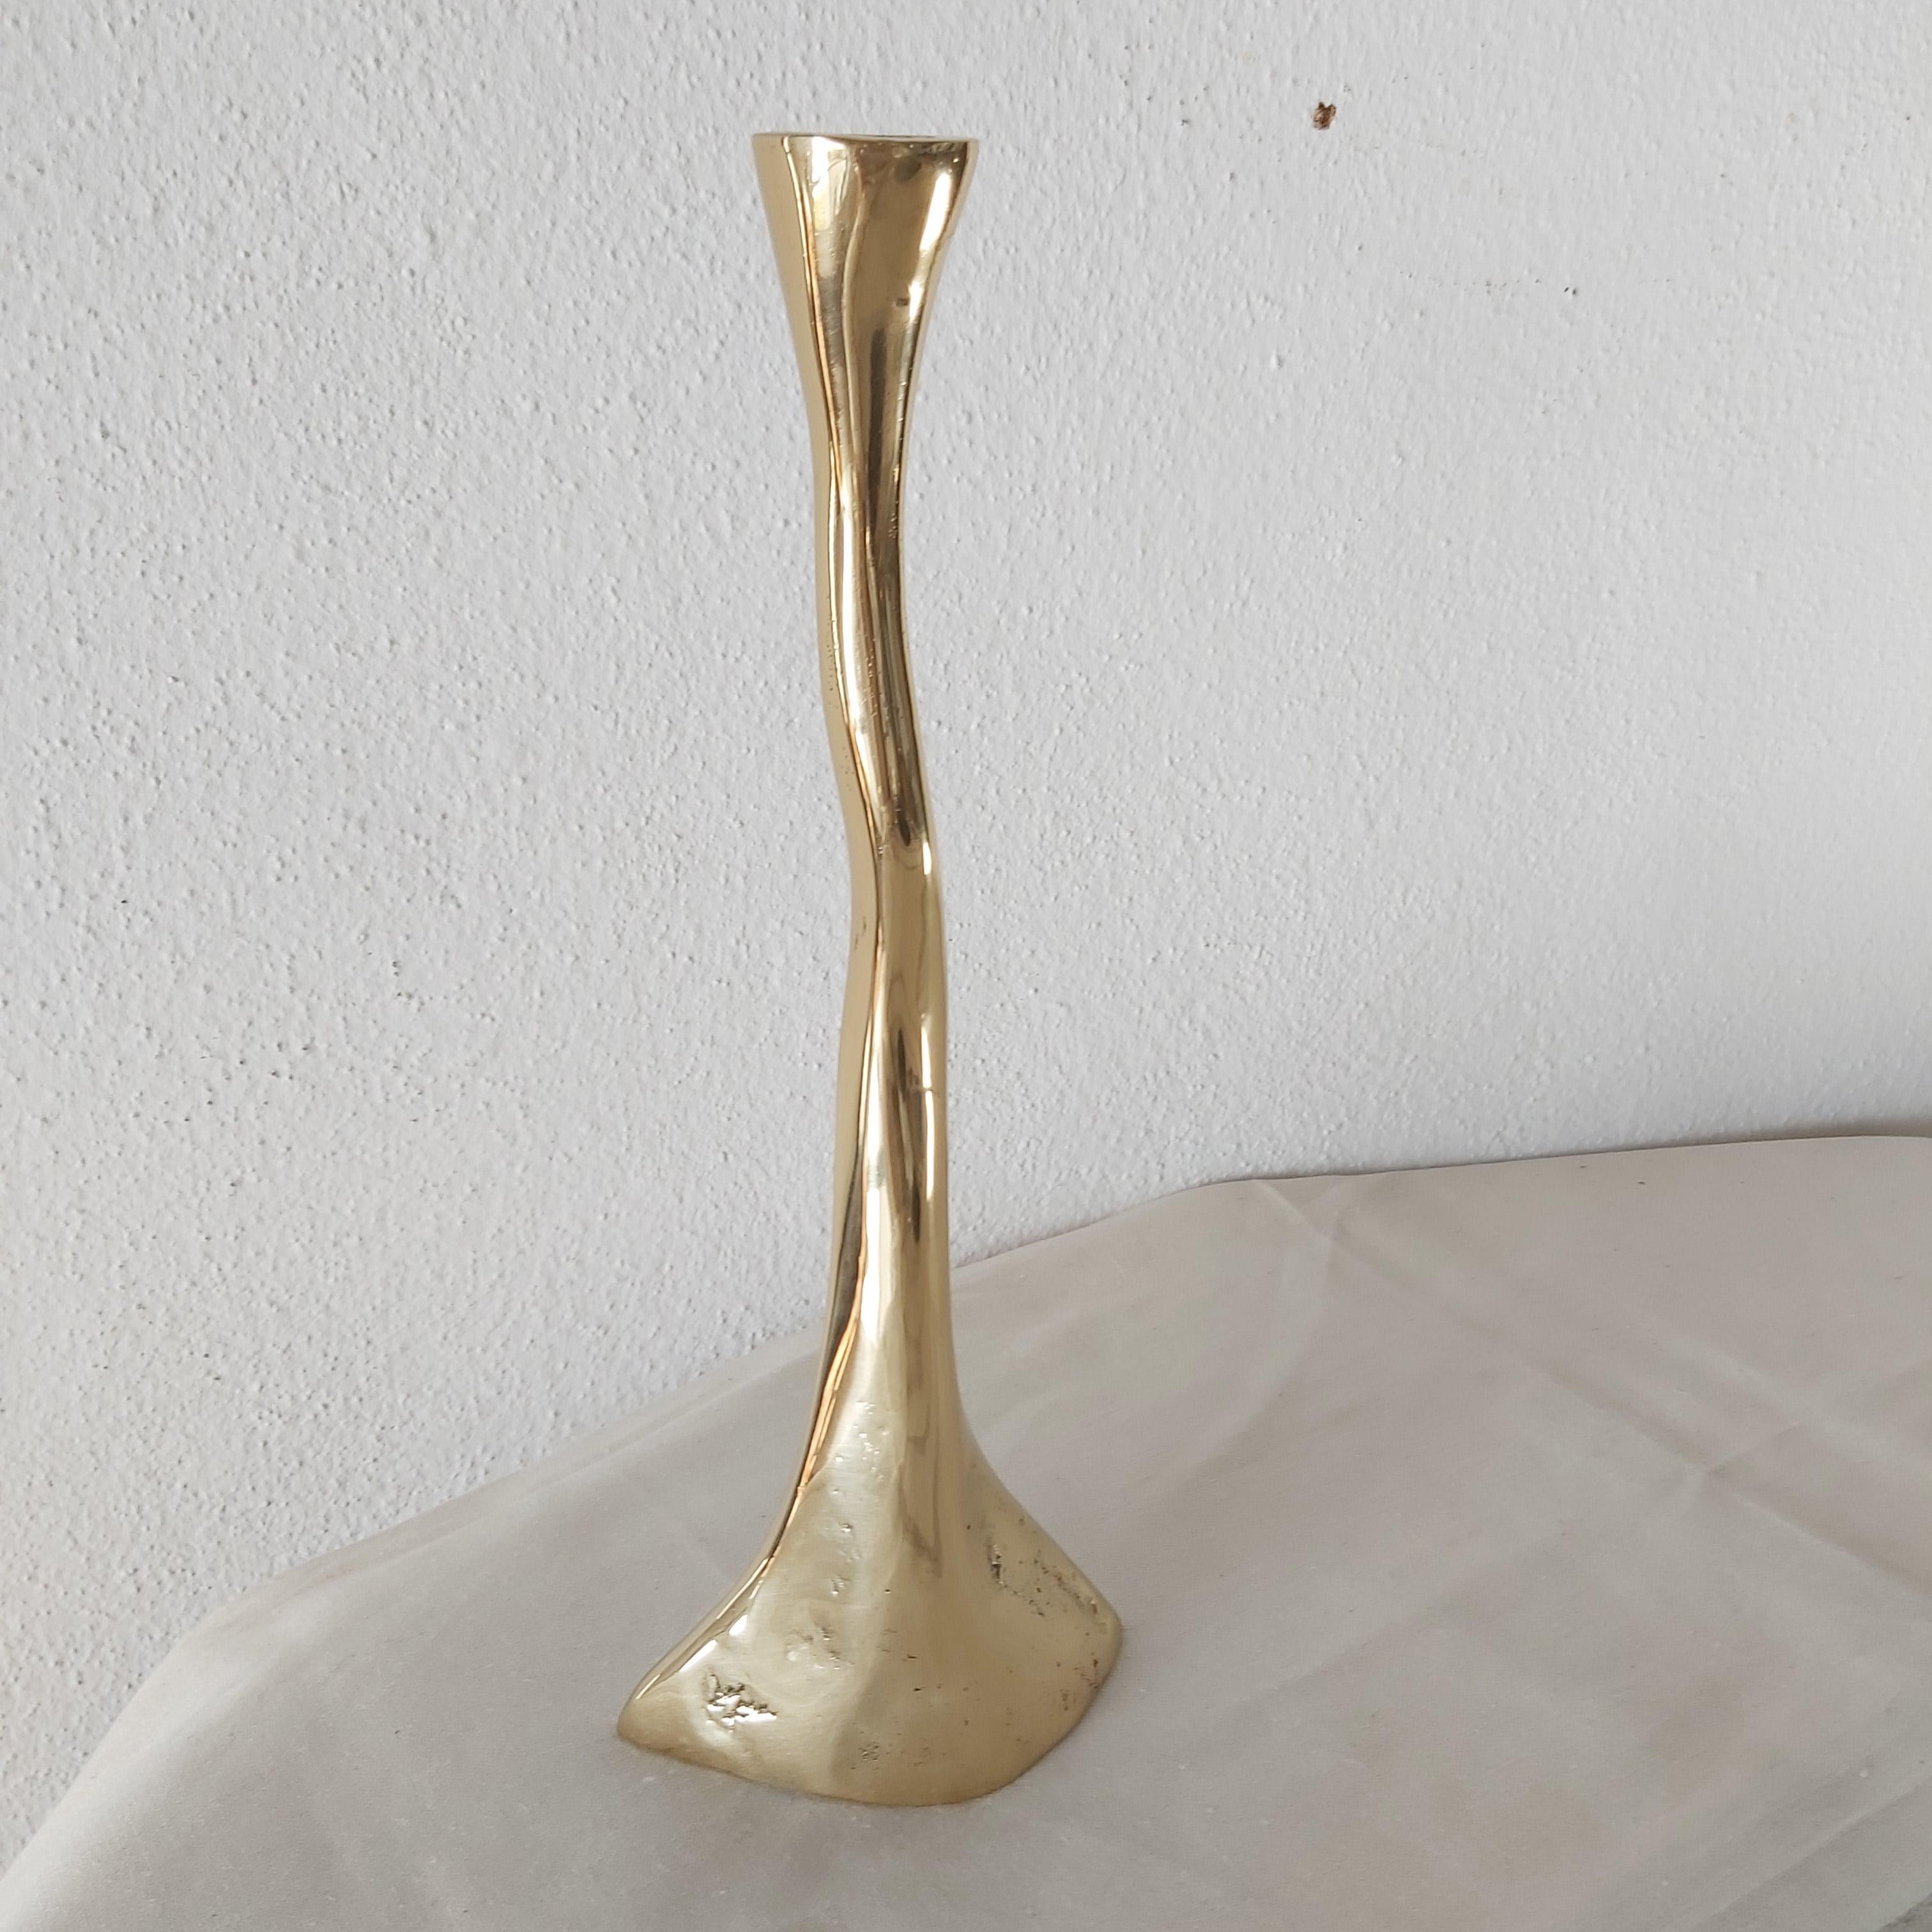 Candelabra Cobra G022 Cast Brass Gold coloured made in Spain by David Marshall In New Condition For Sale In Benahavis, AN